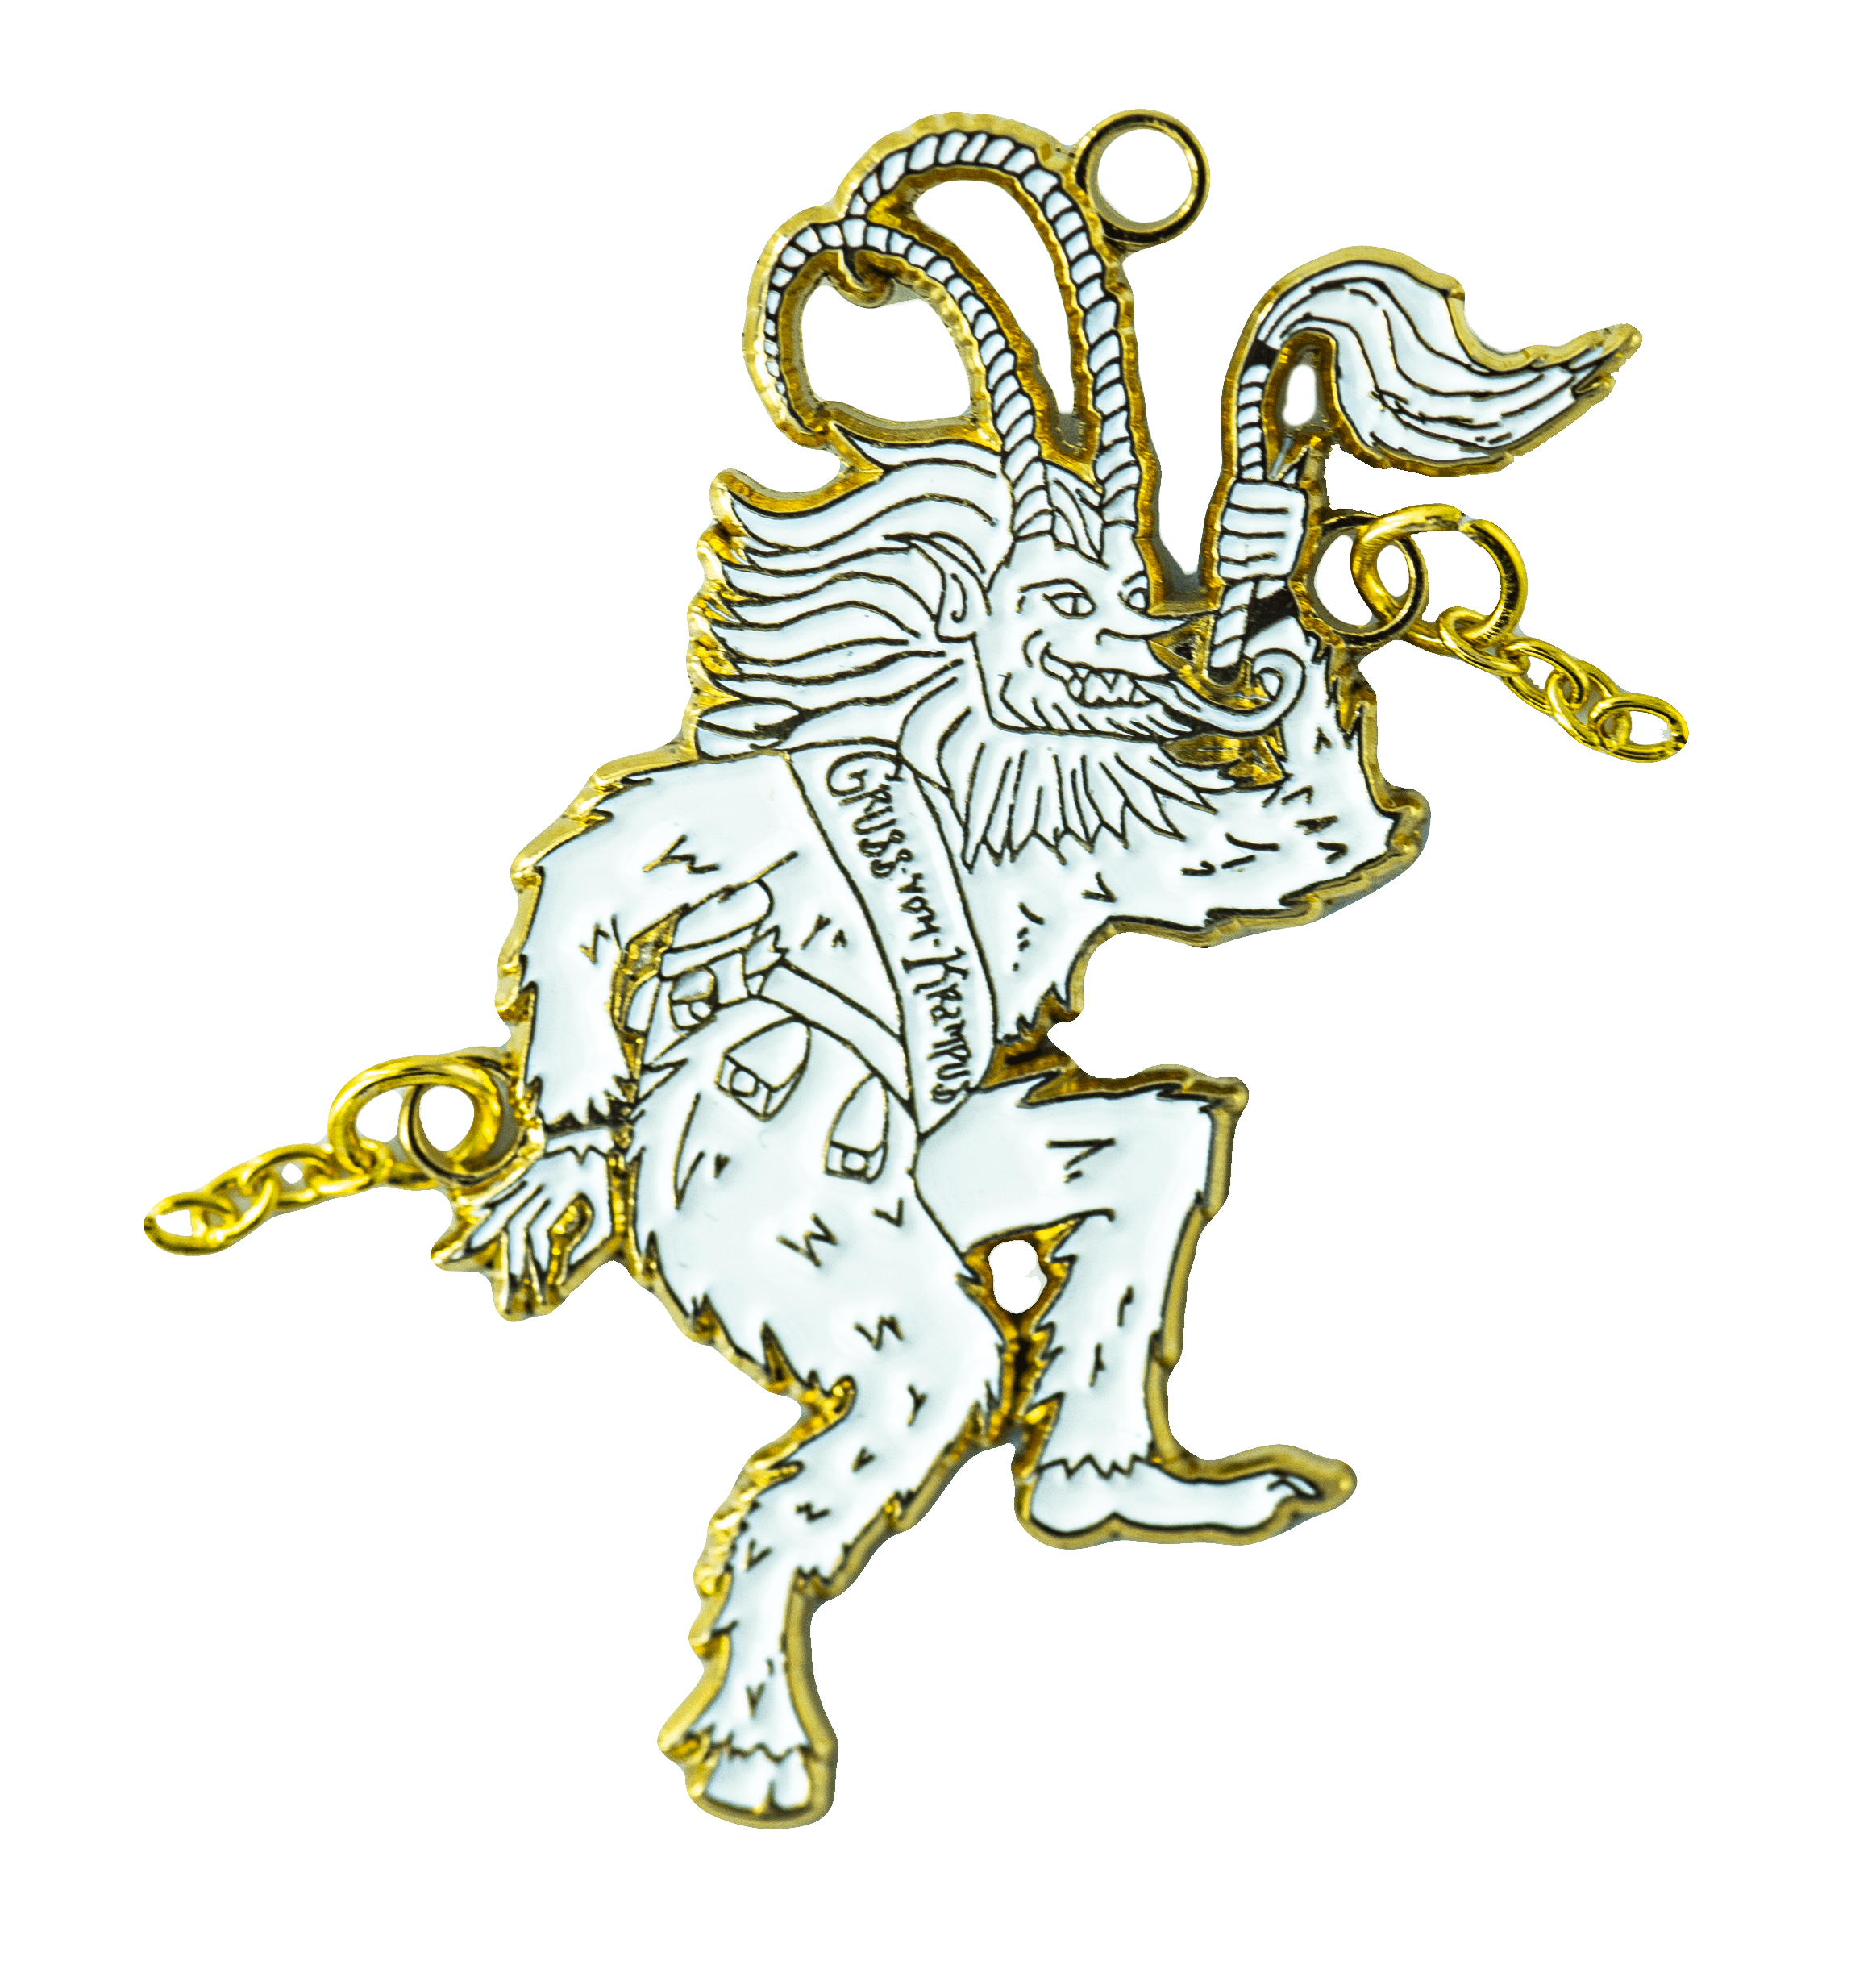 A white and gold ornament of Krampus sticking his tongue out and flailing his chains as he dances. He wears a sash that reads "Gross Vom Krampus". 